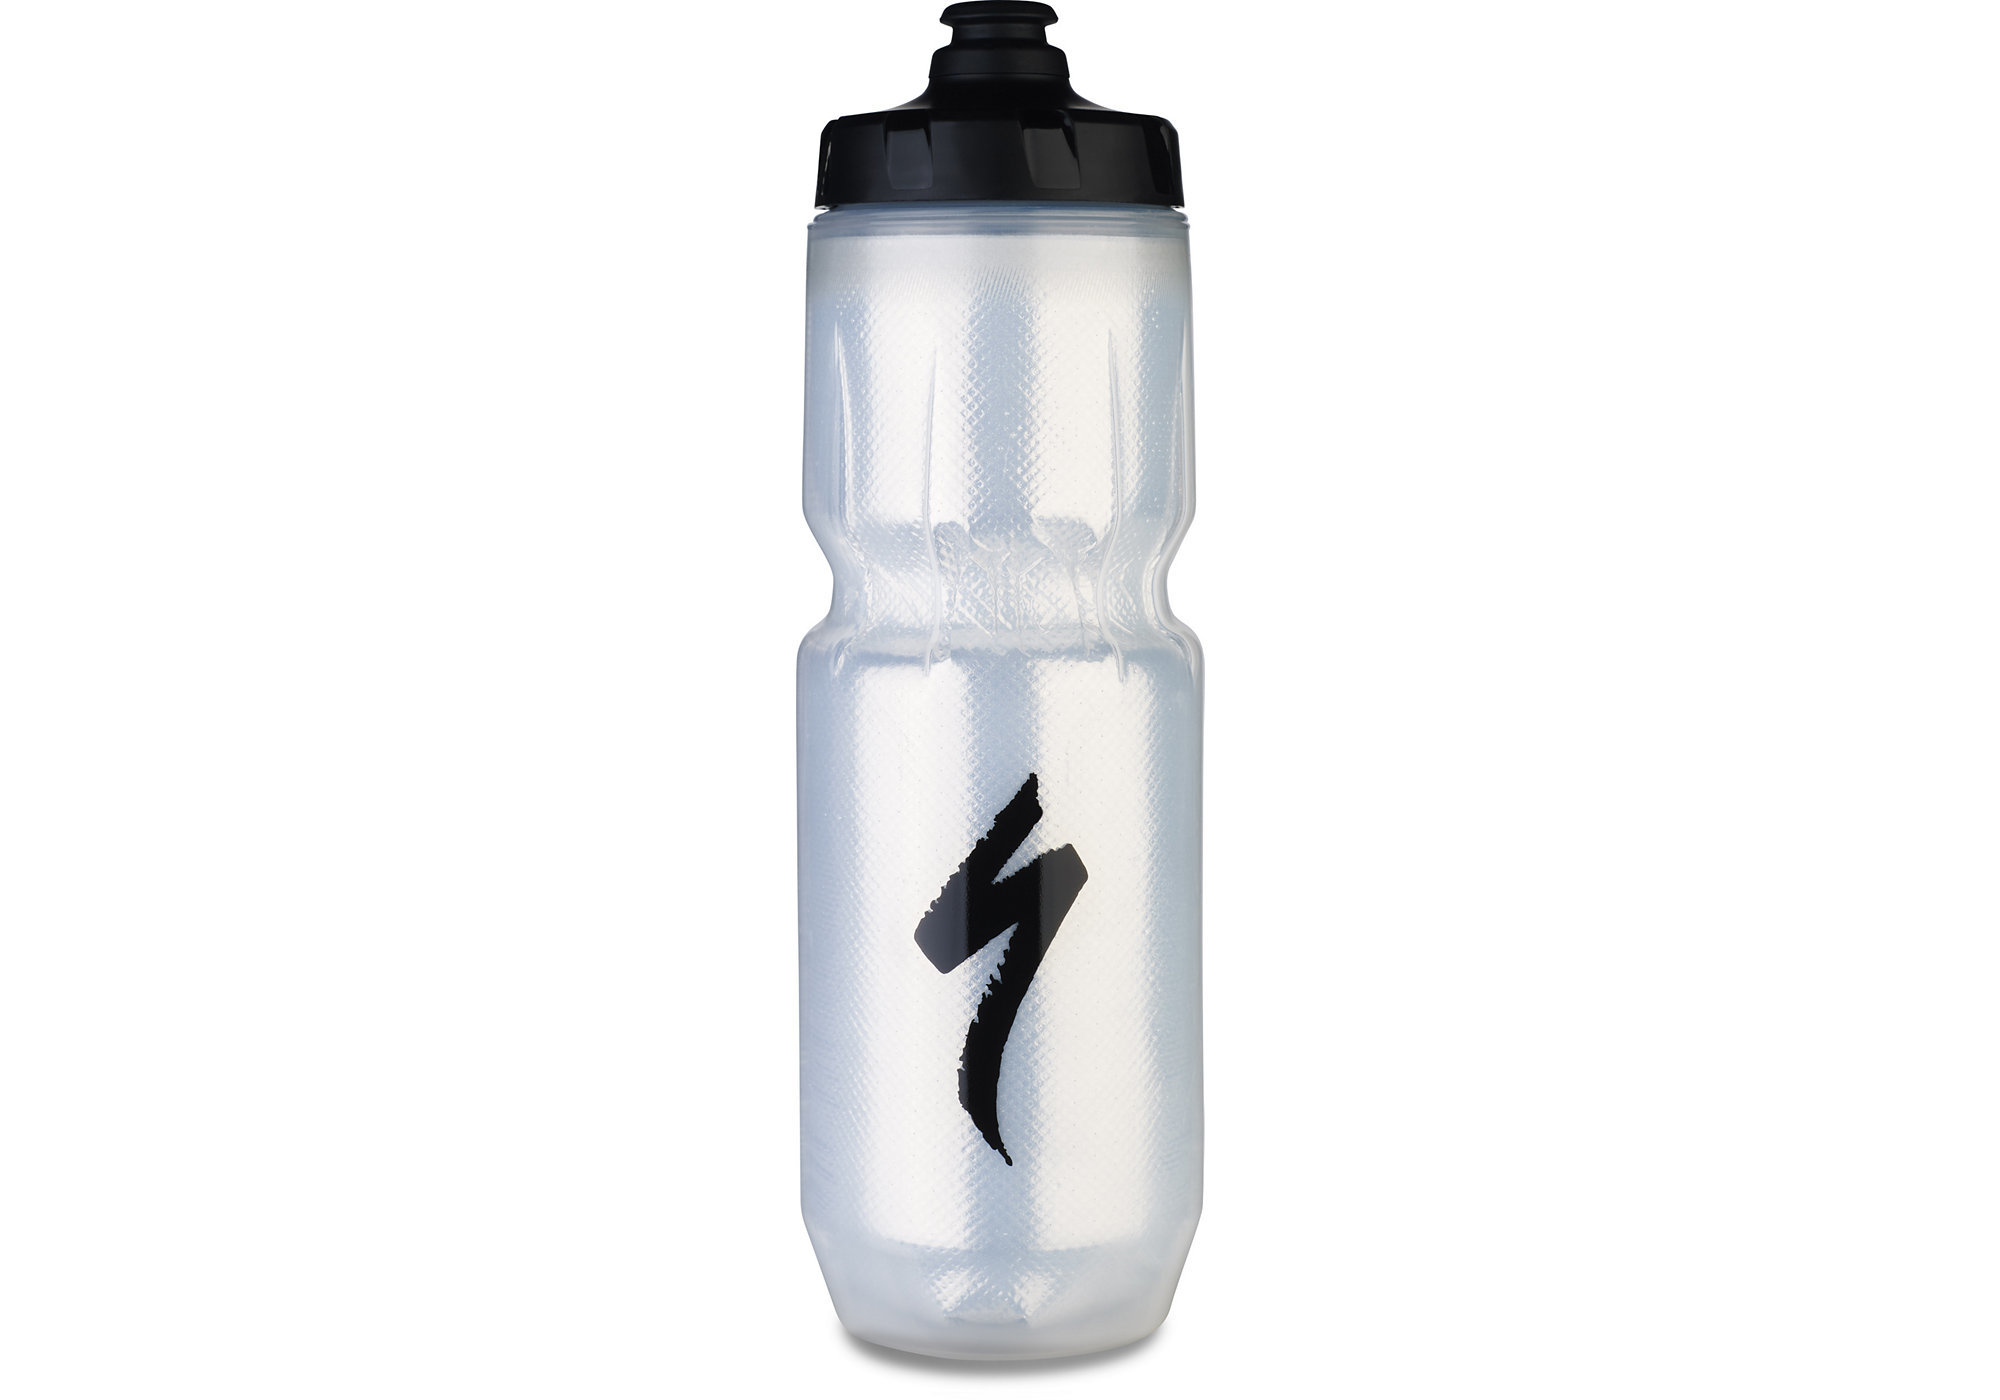 https://www.sefiles.net/images/library/zoom/specialized-purist-insulated-moflo-water-bottle-330353-13.jpg